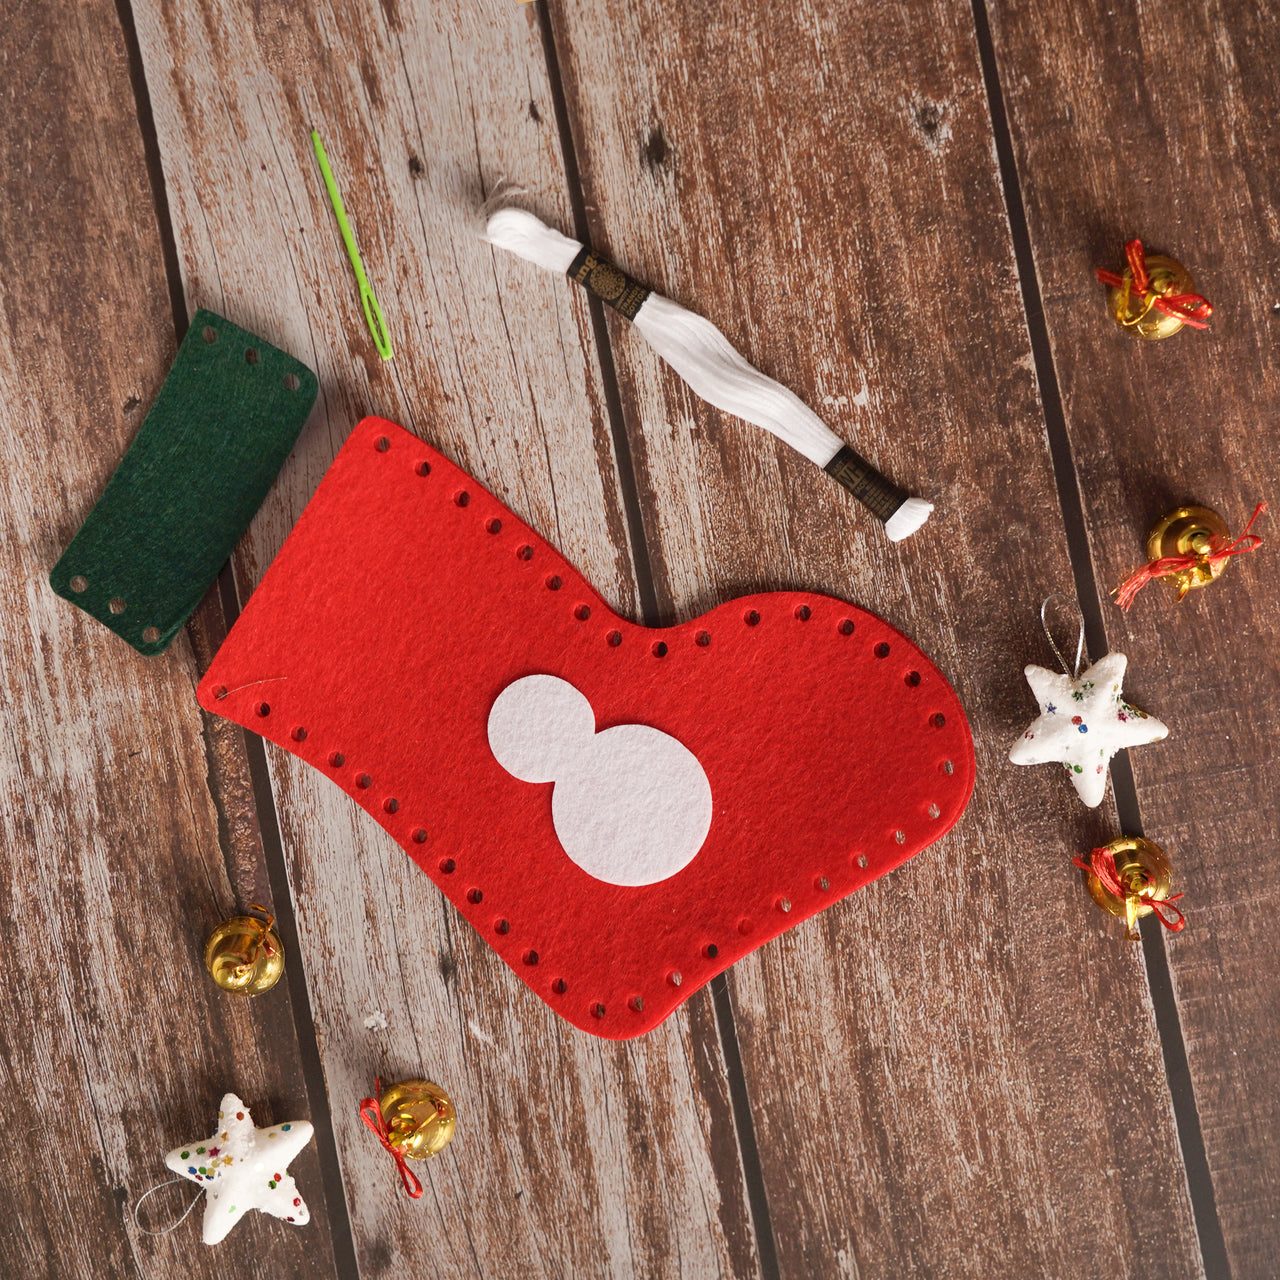 DIY - Sew Your Own Christmas Stocking